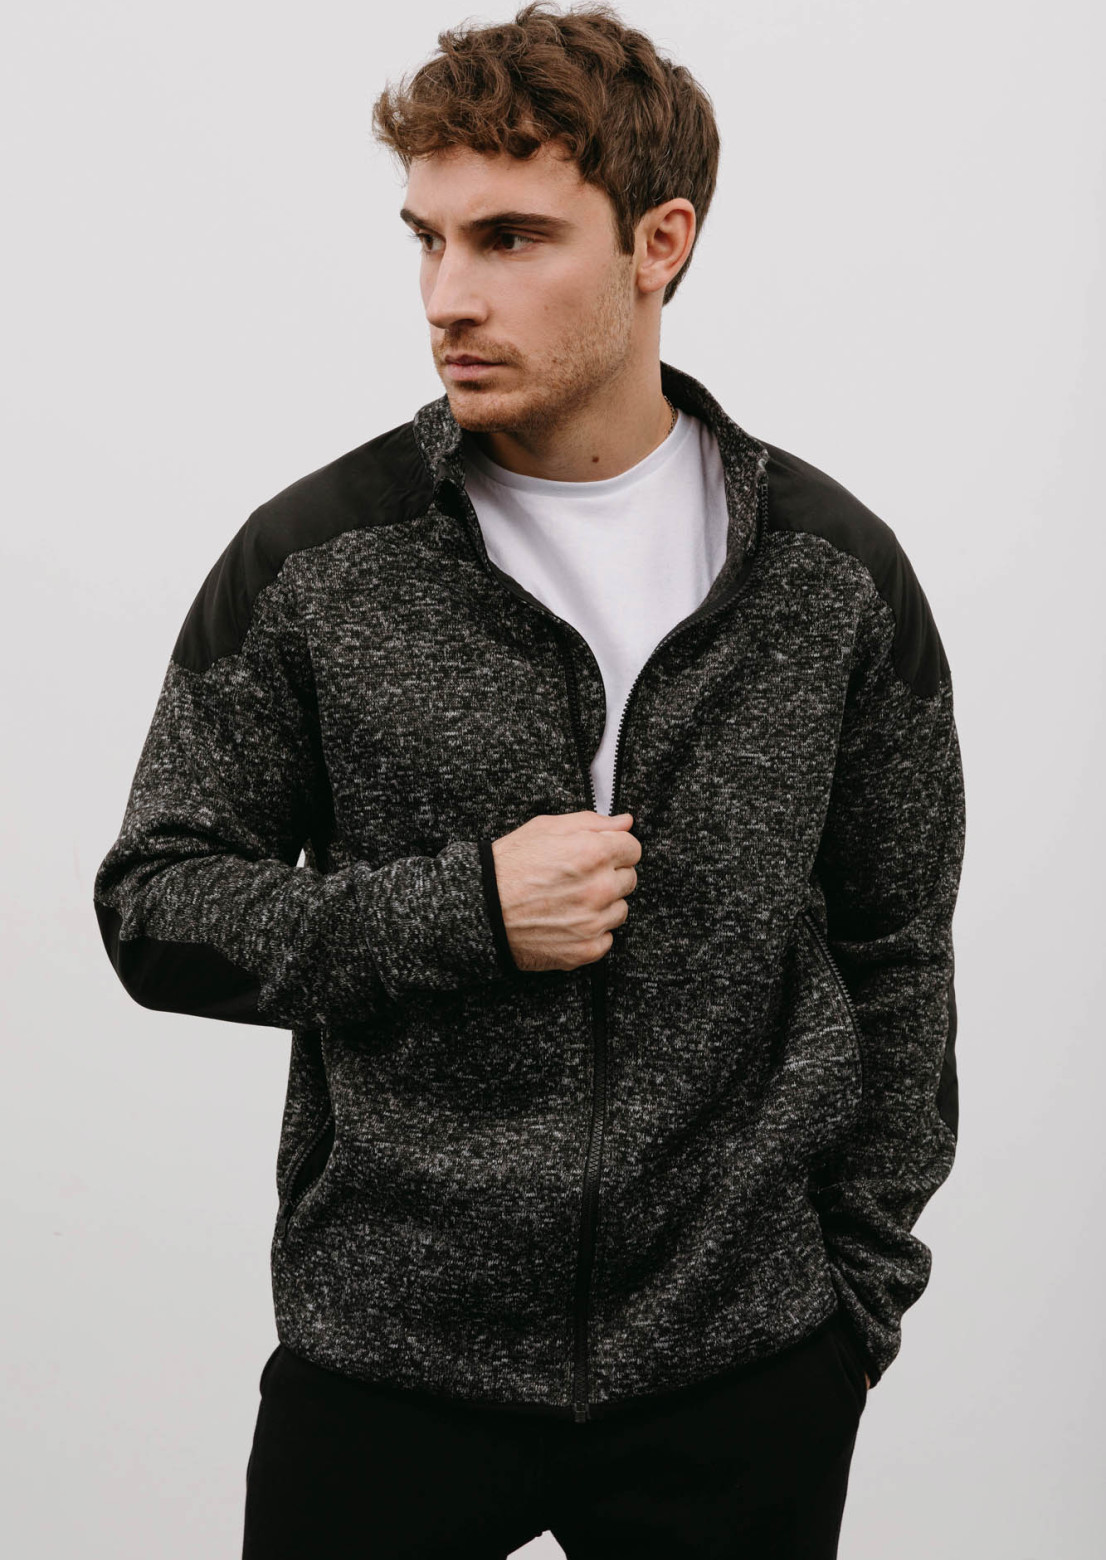 Dark grey color men's knitted insulated sweatshirt with a zipper